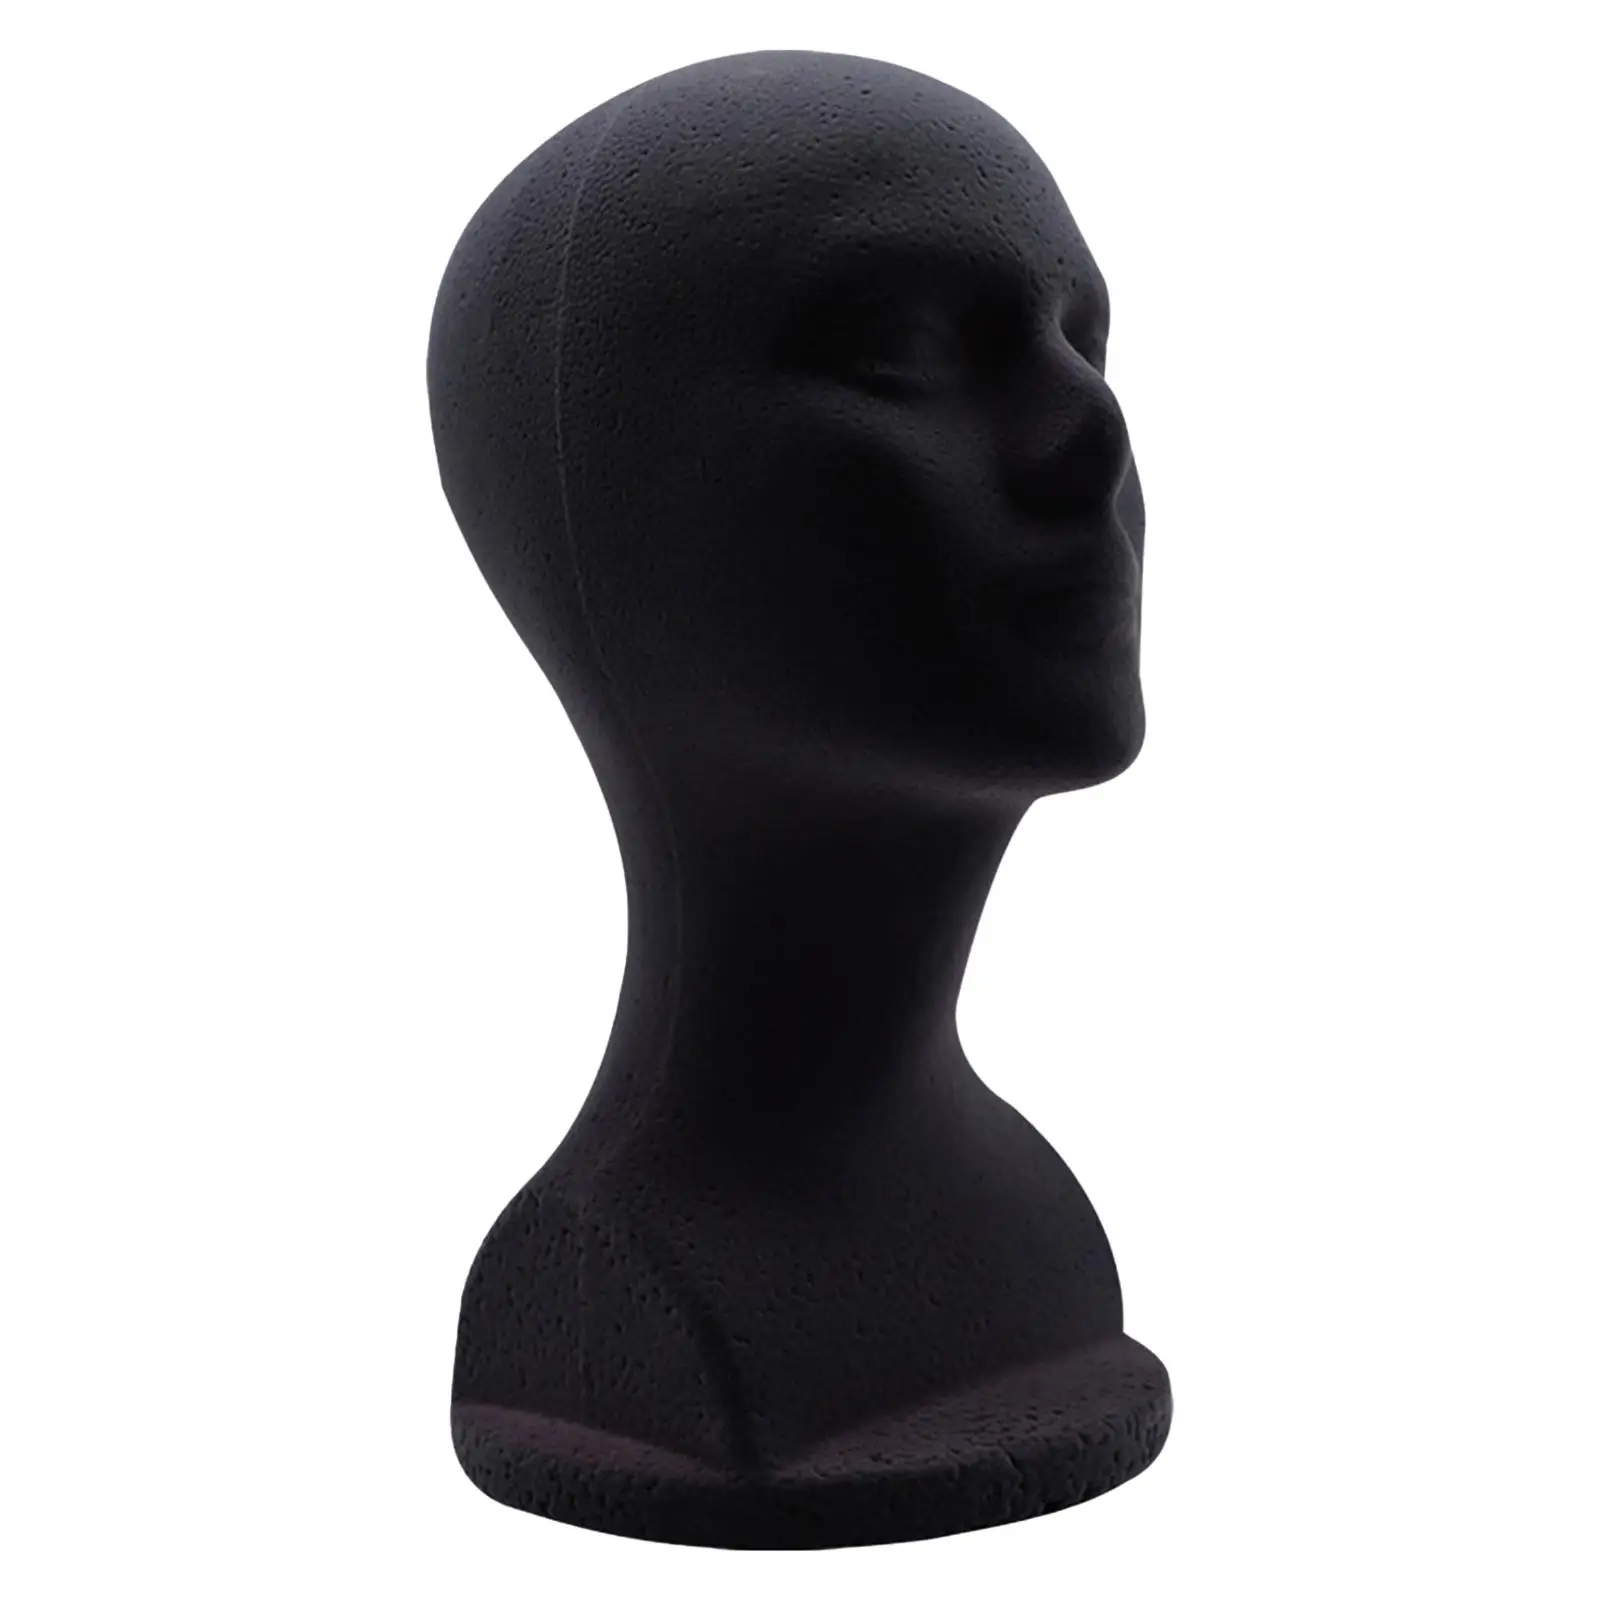 Man Mannequin Head Model Hat Display Stand Black Smooth Surface